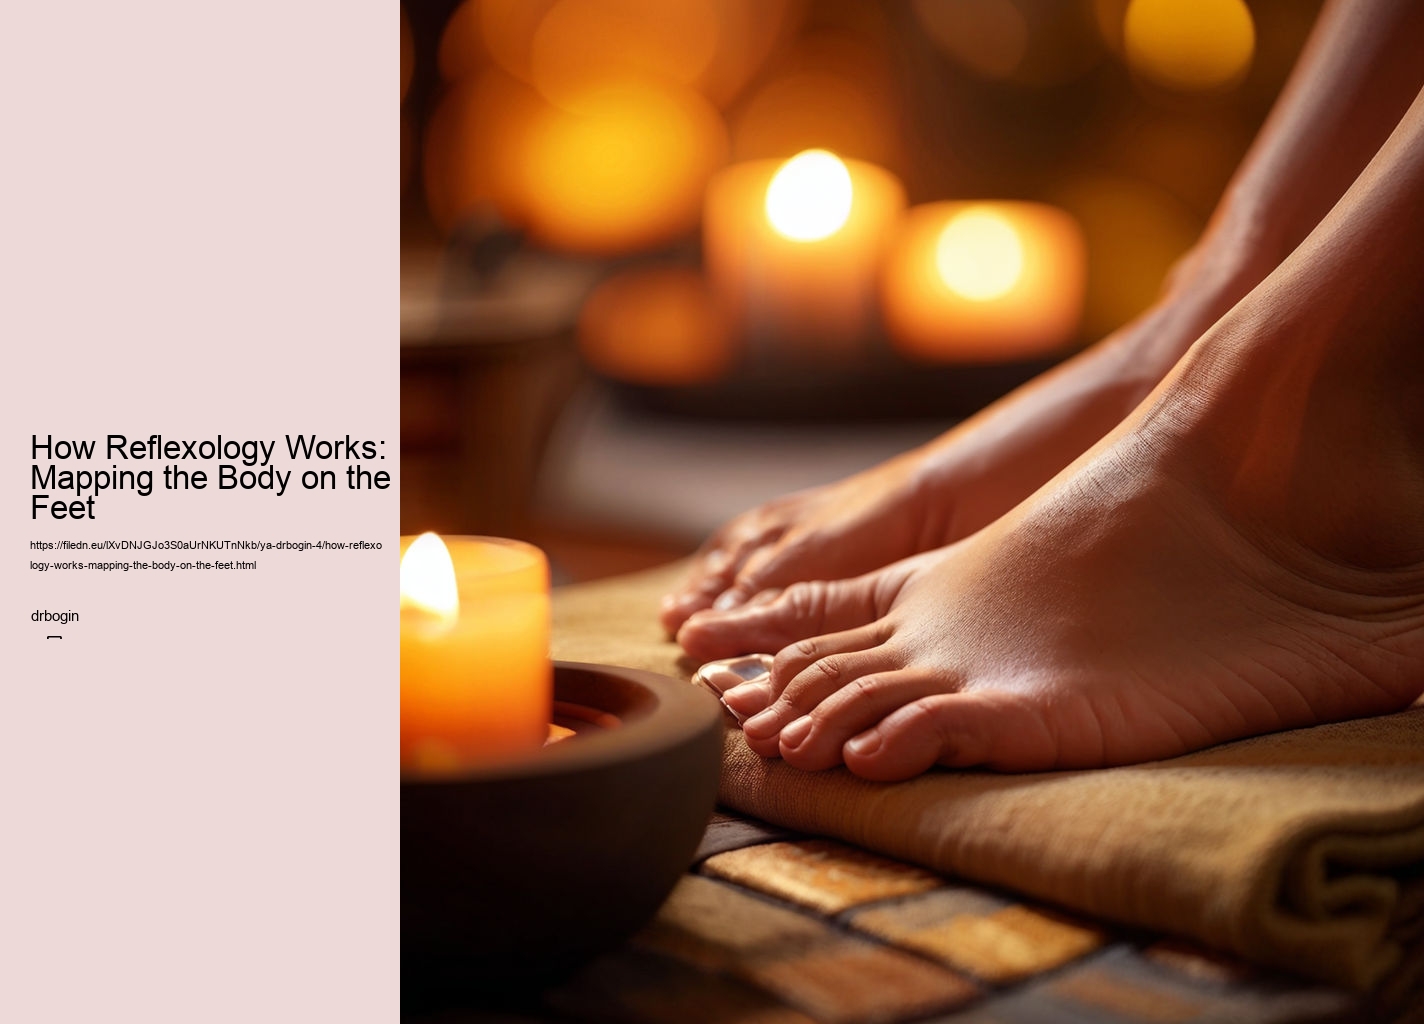 How Reflexology Works: Mapping the Body on the Feet